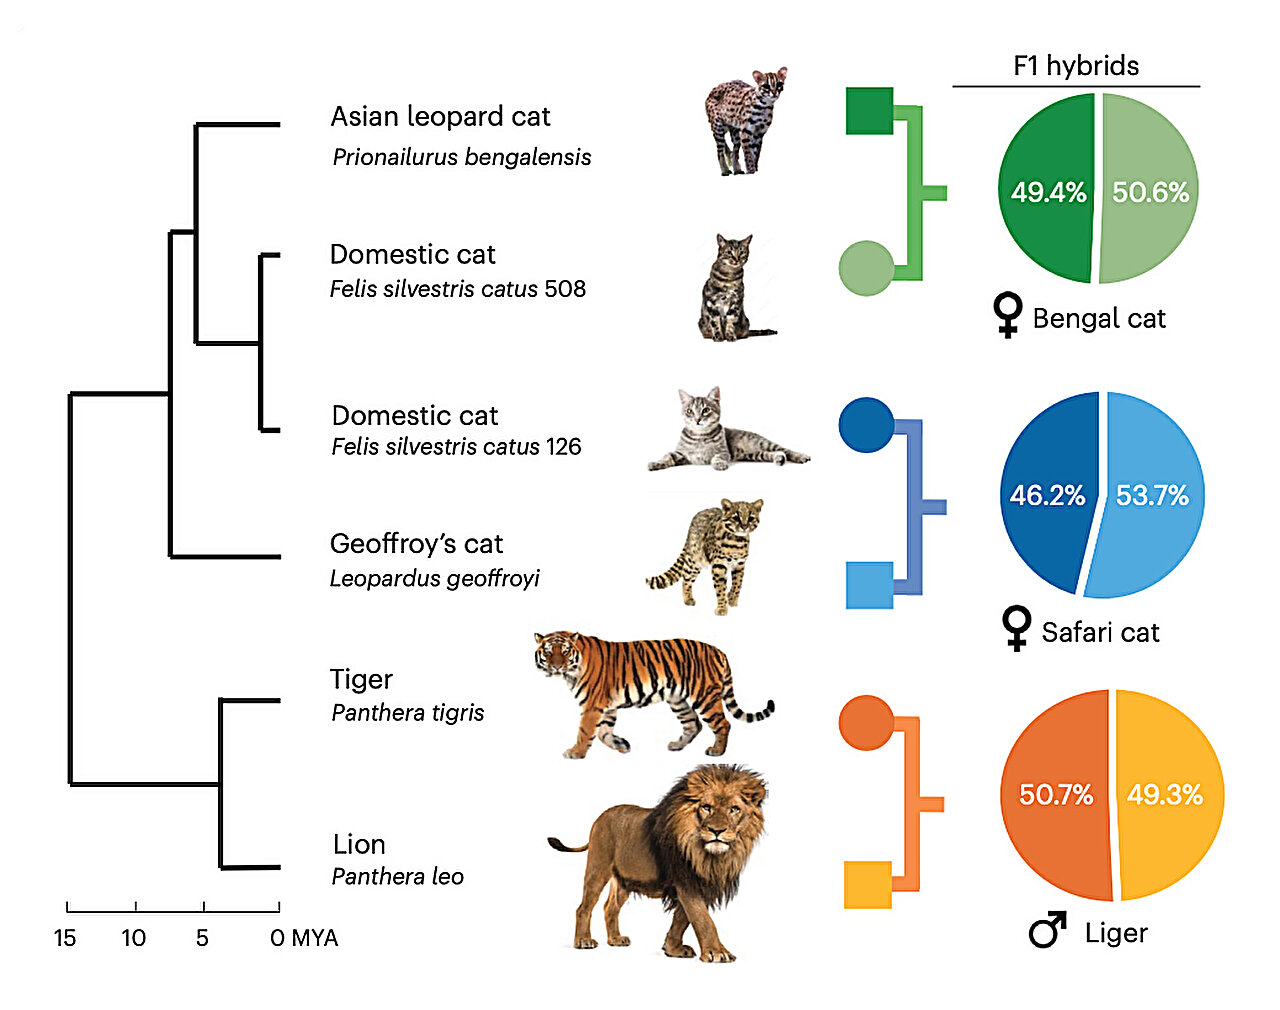 Genome sequencing project reveals new secrets about cat evolution